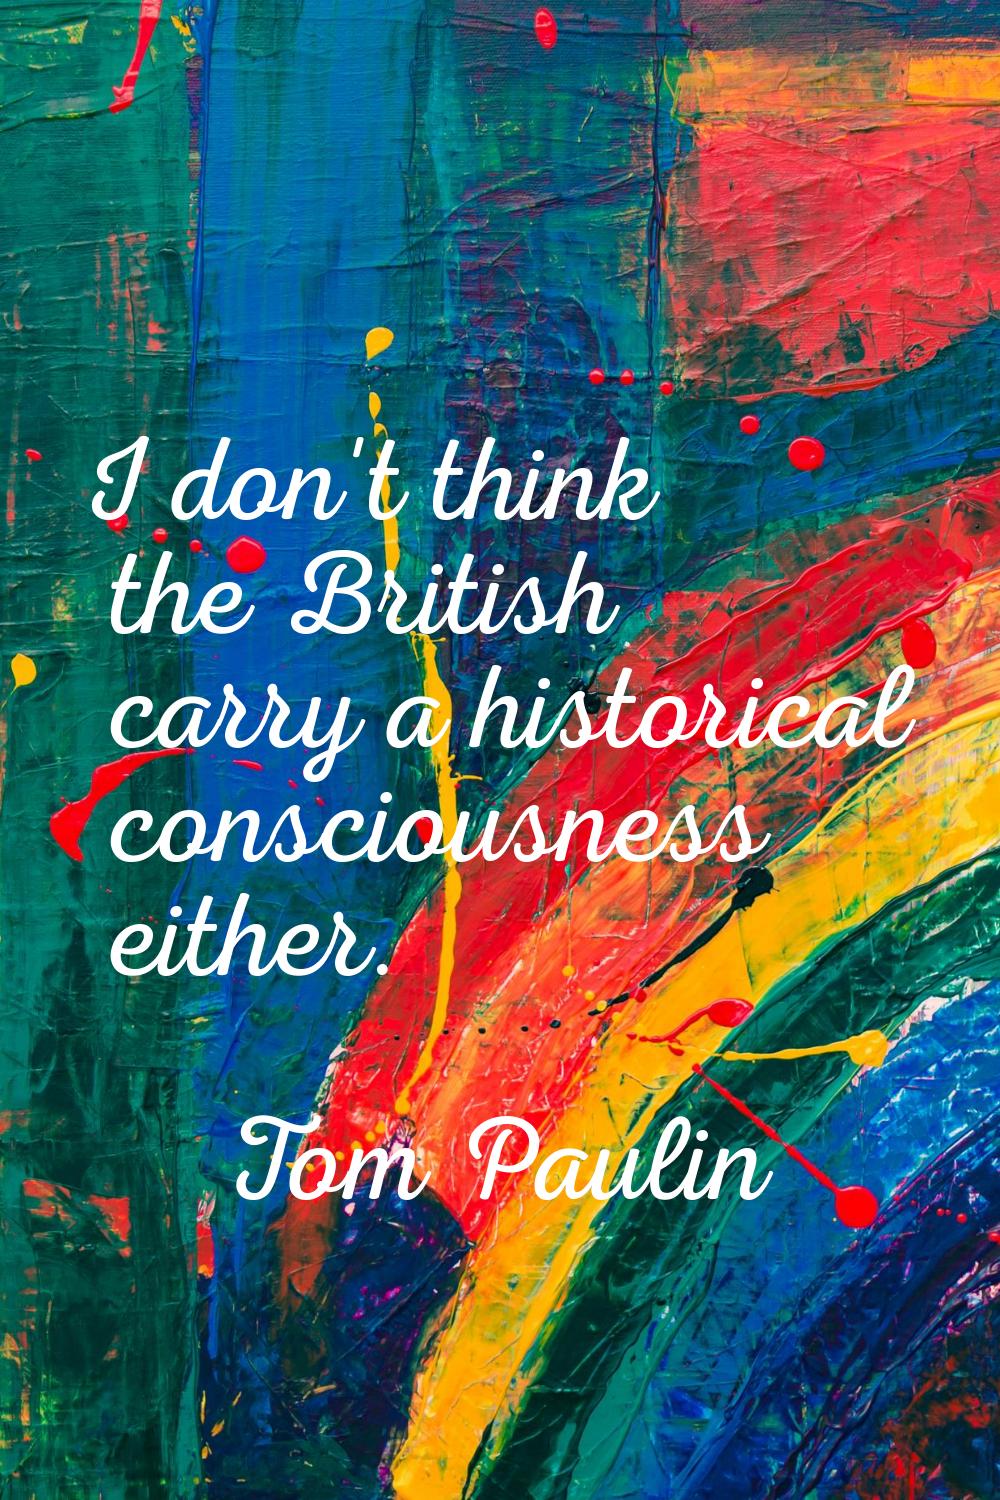 I don't think the British carry a historical consciousness either.